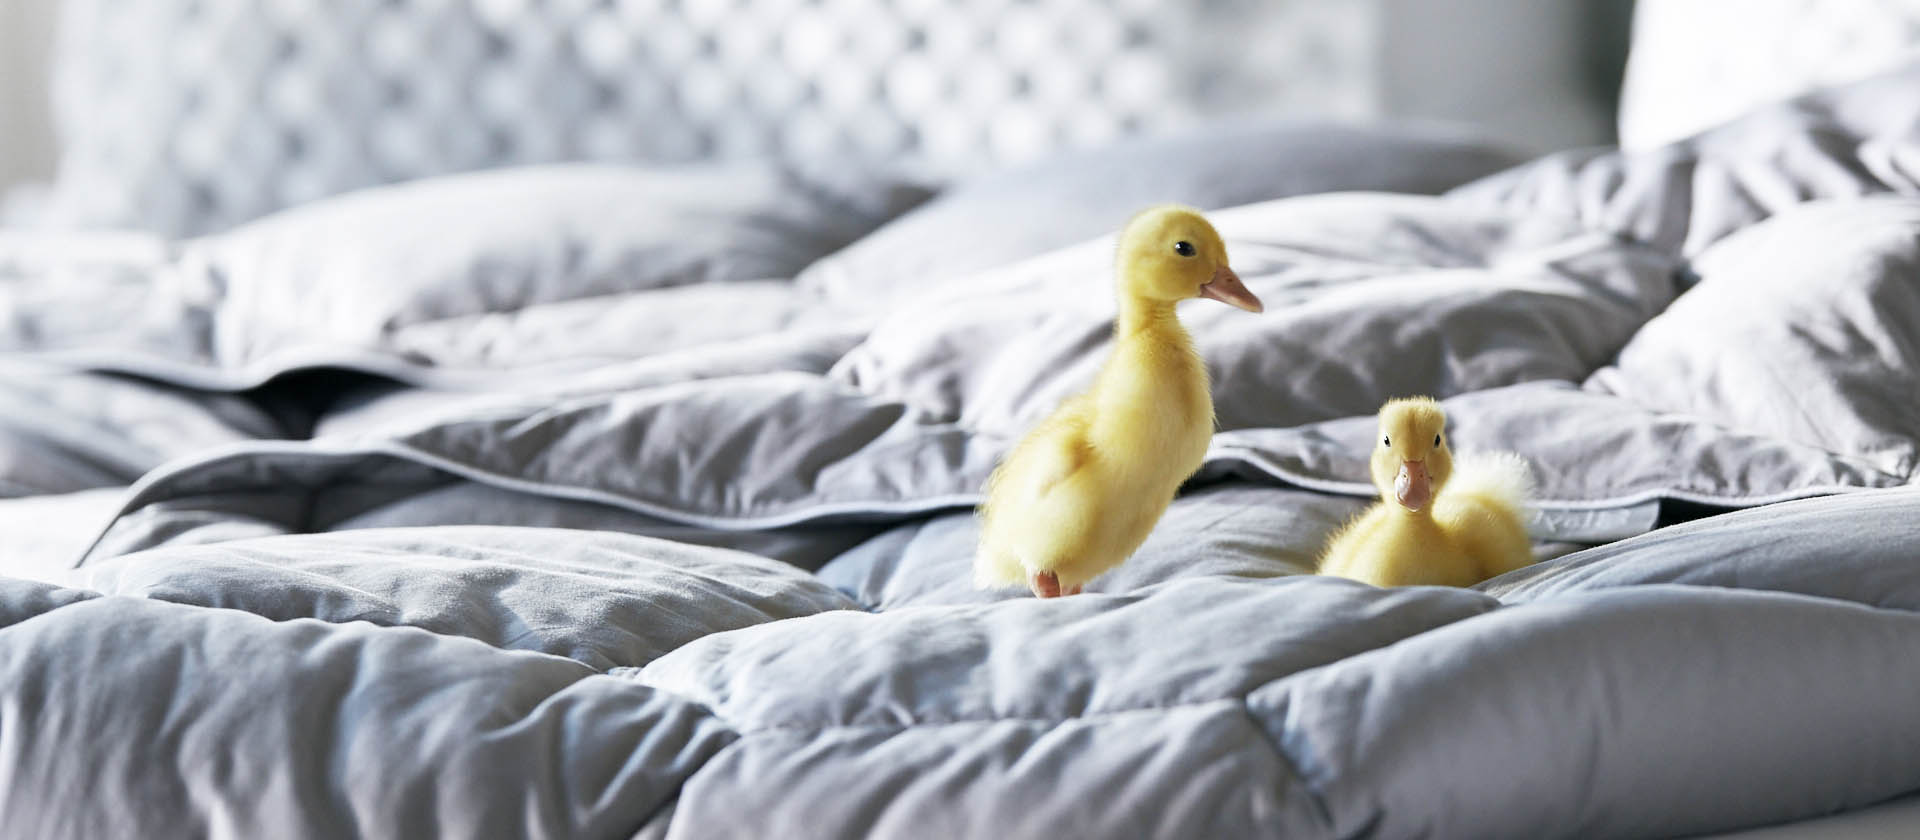 Two baby ducks on a gray comforter